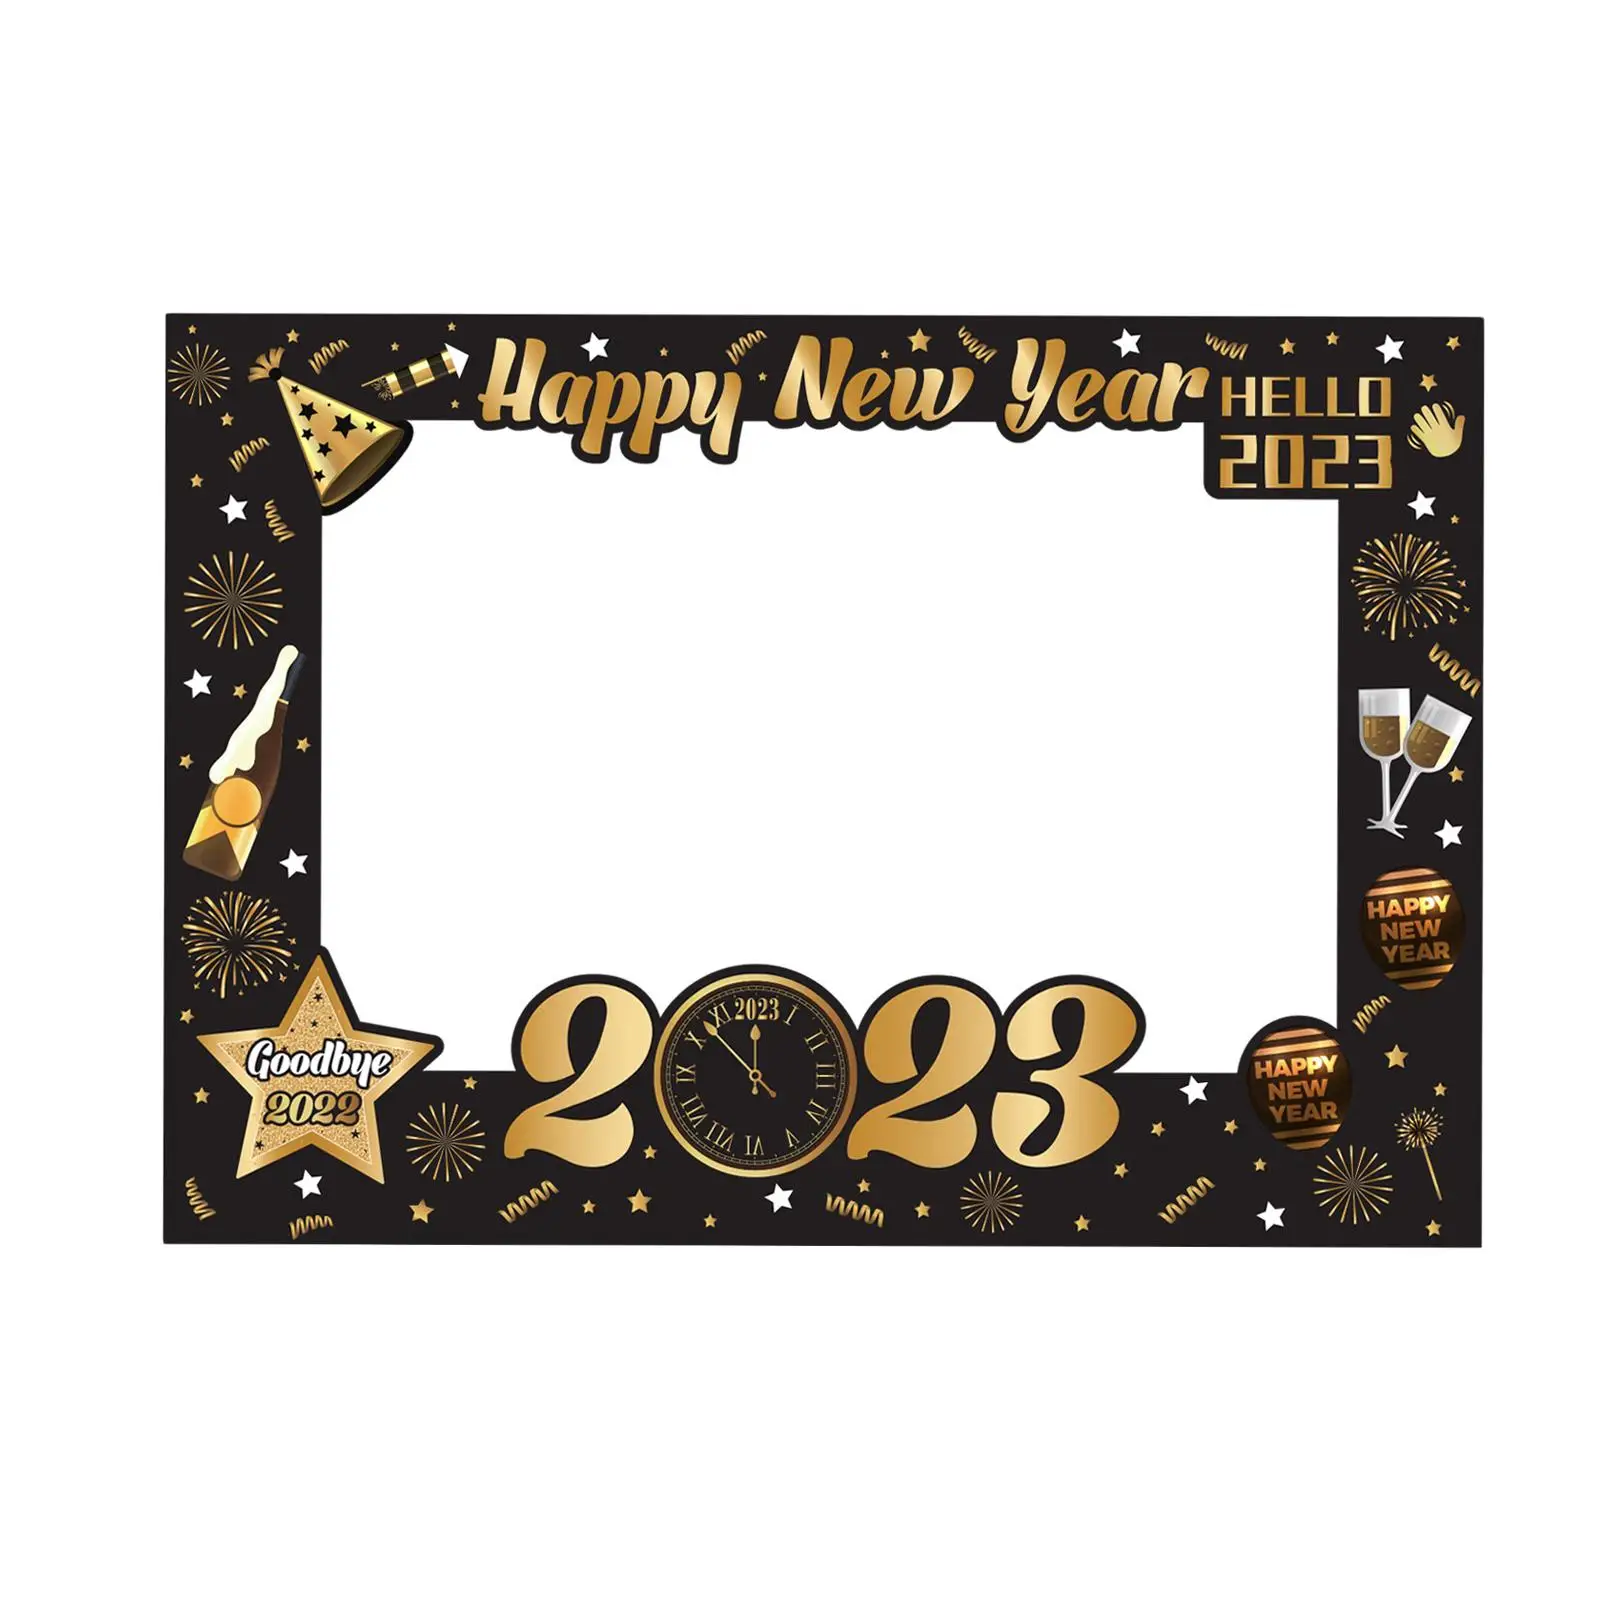 Photobooth Props Picture Frame Decoration Hello 2023 Background for Wedding